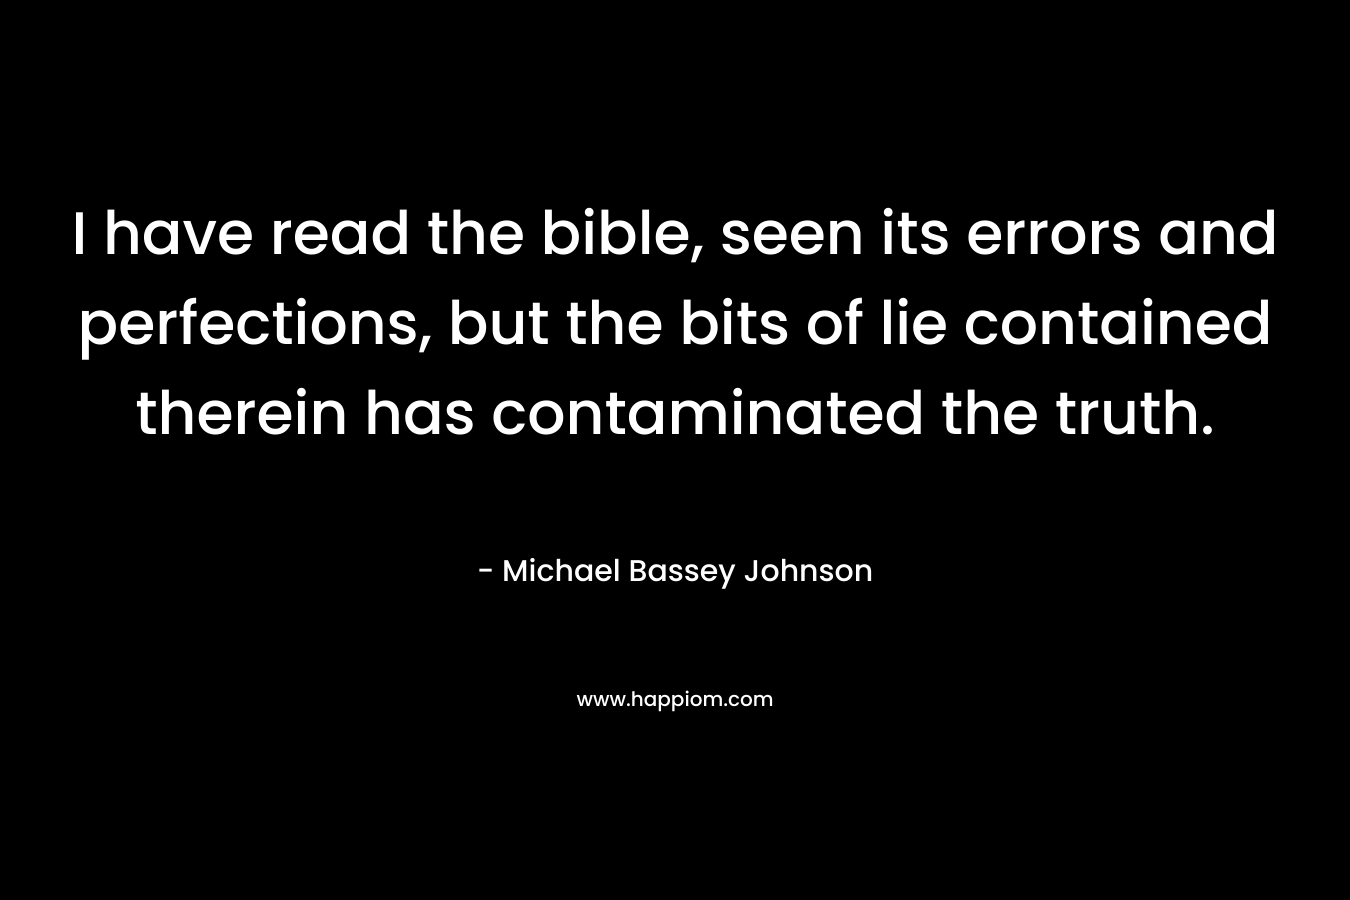 I have read the bible, seen its errors and perfections, but the bits of lie contained therein has contaminated the truth. – Michael Bassey Johnson